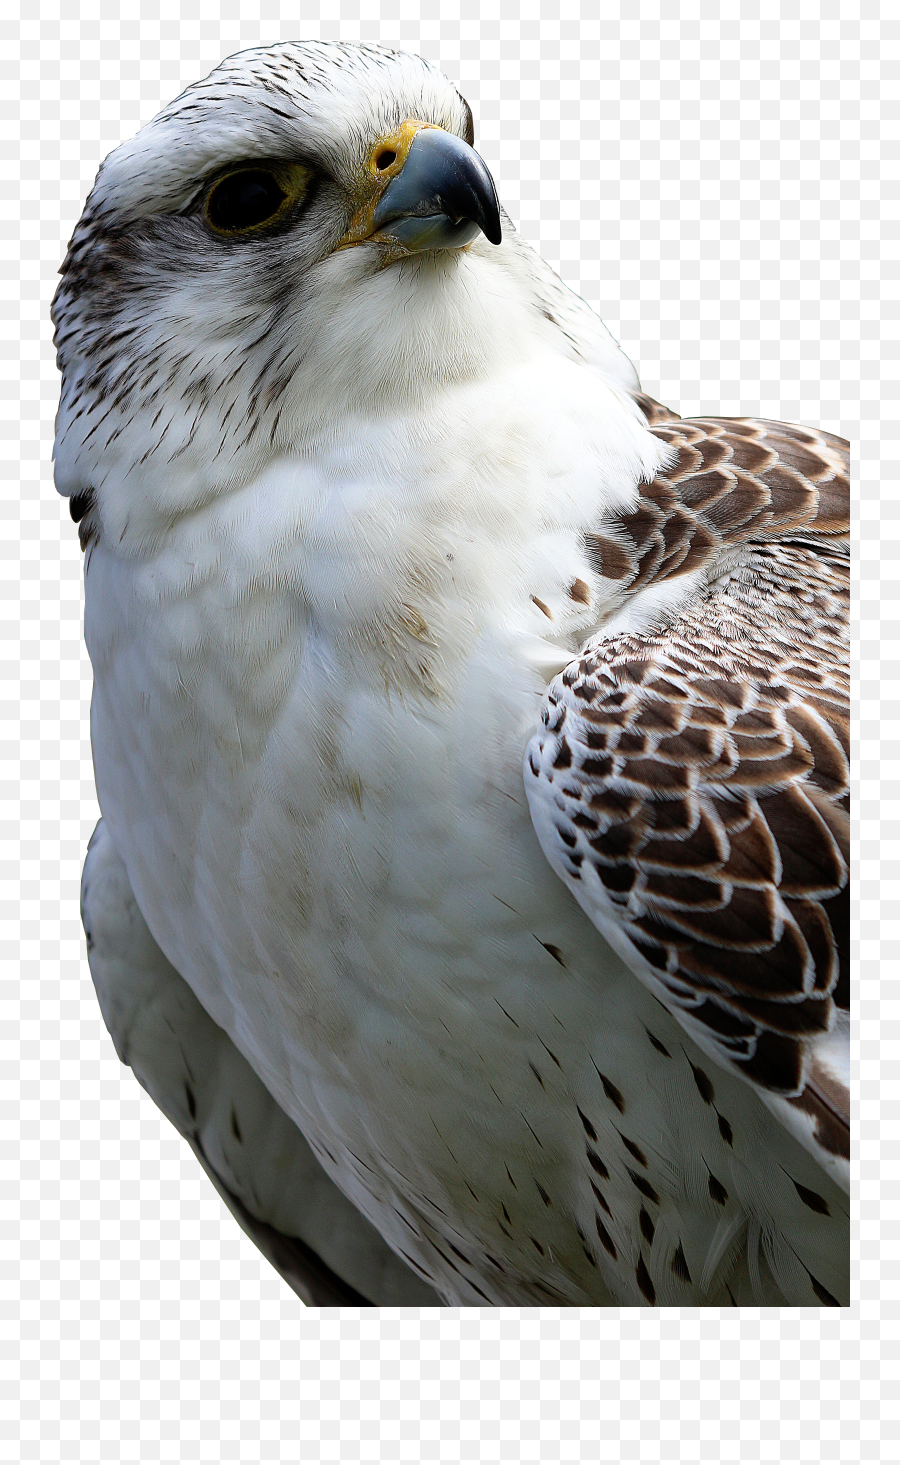 Download Hawk Png Image For Free